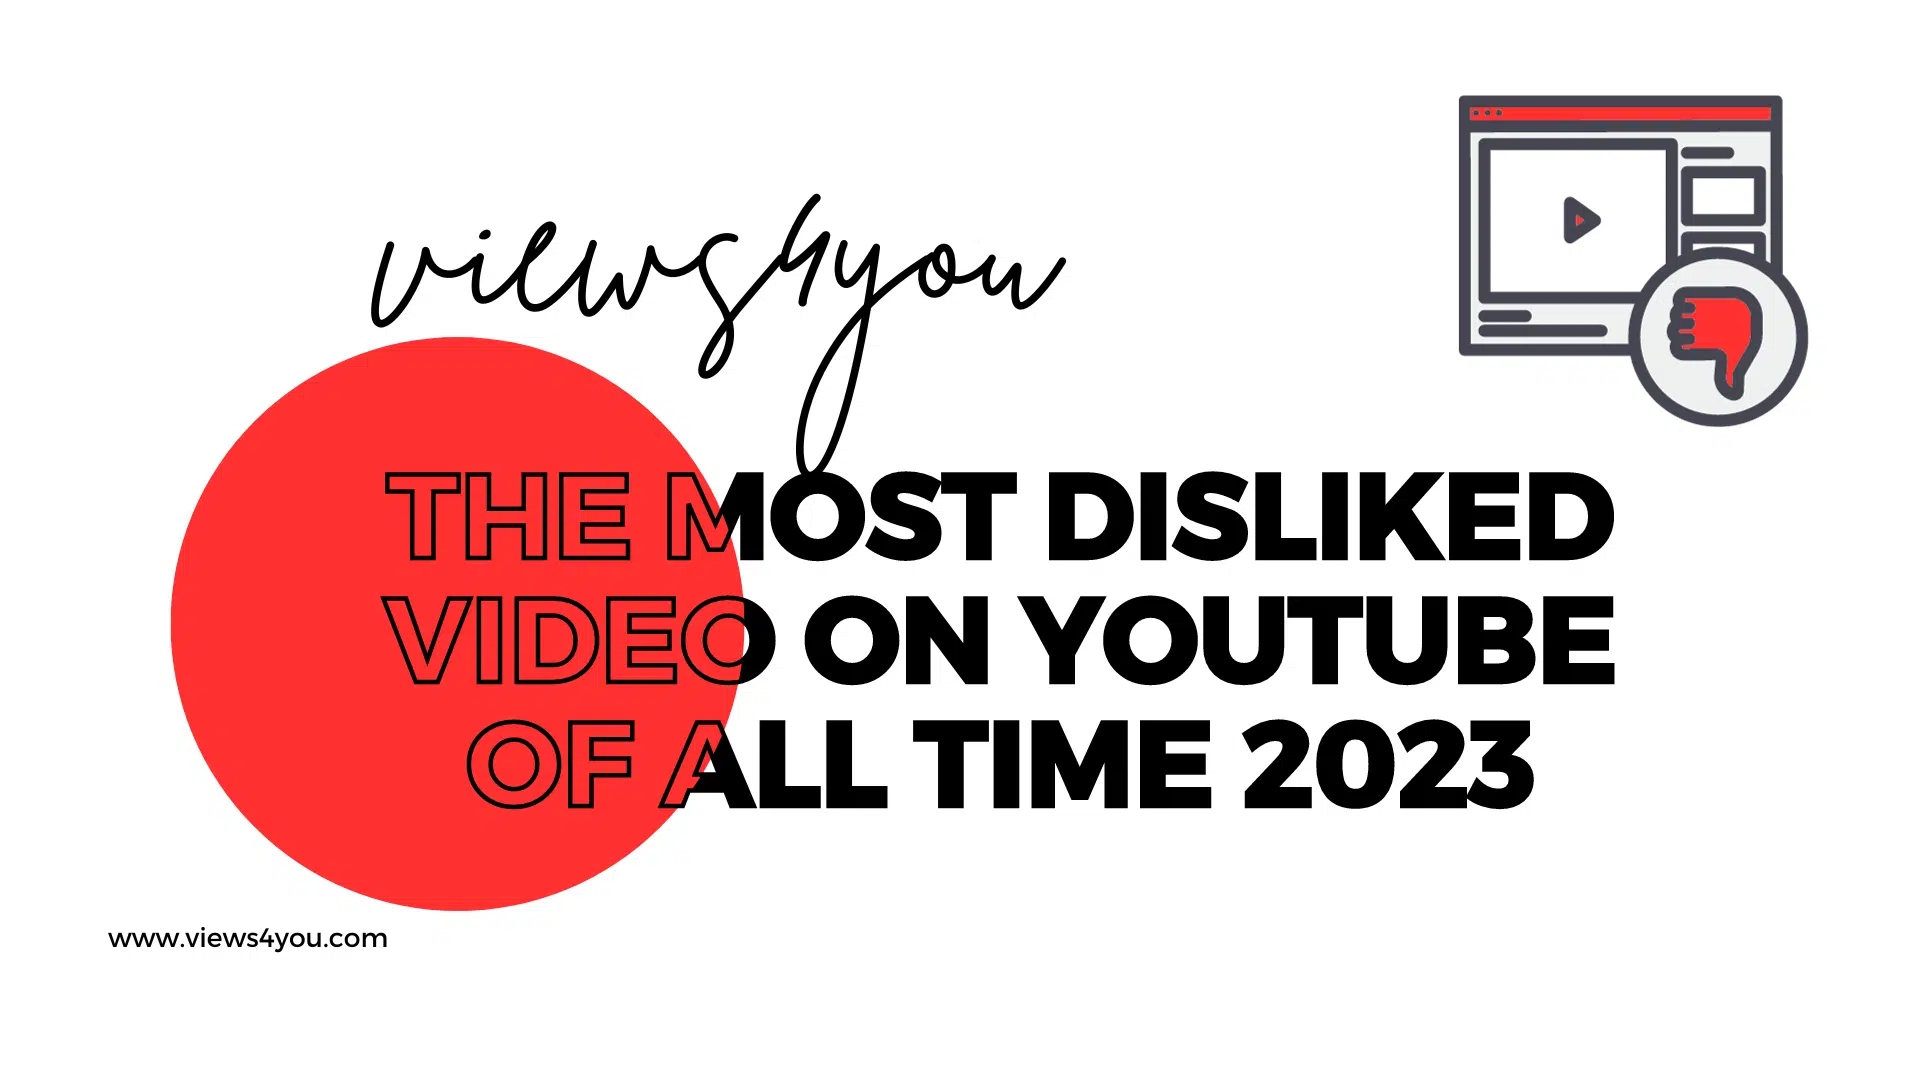 8 most disliked videos on YouTube for 2023